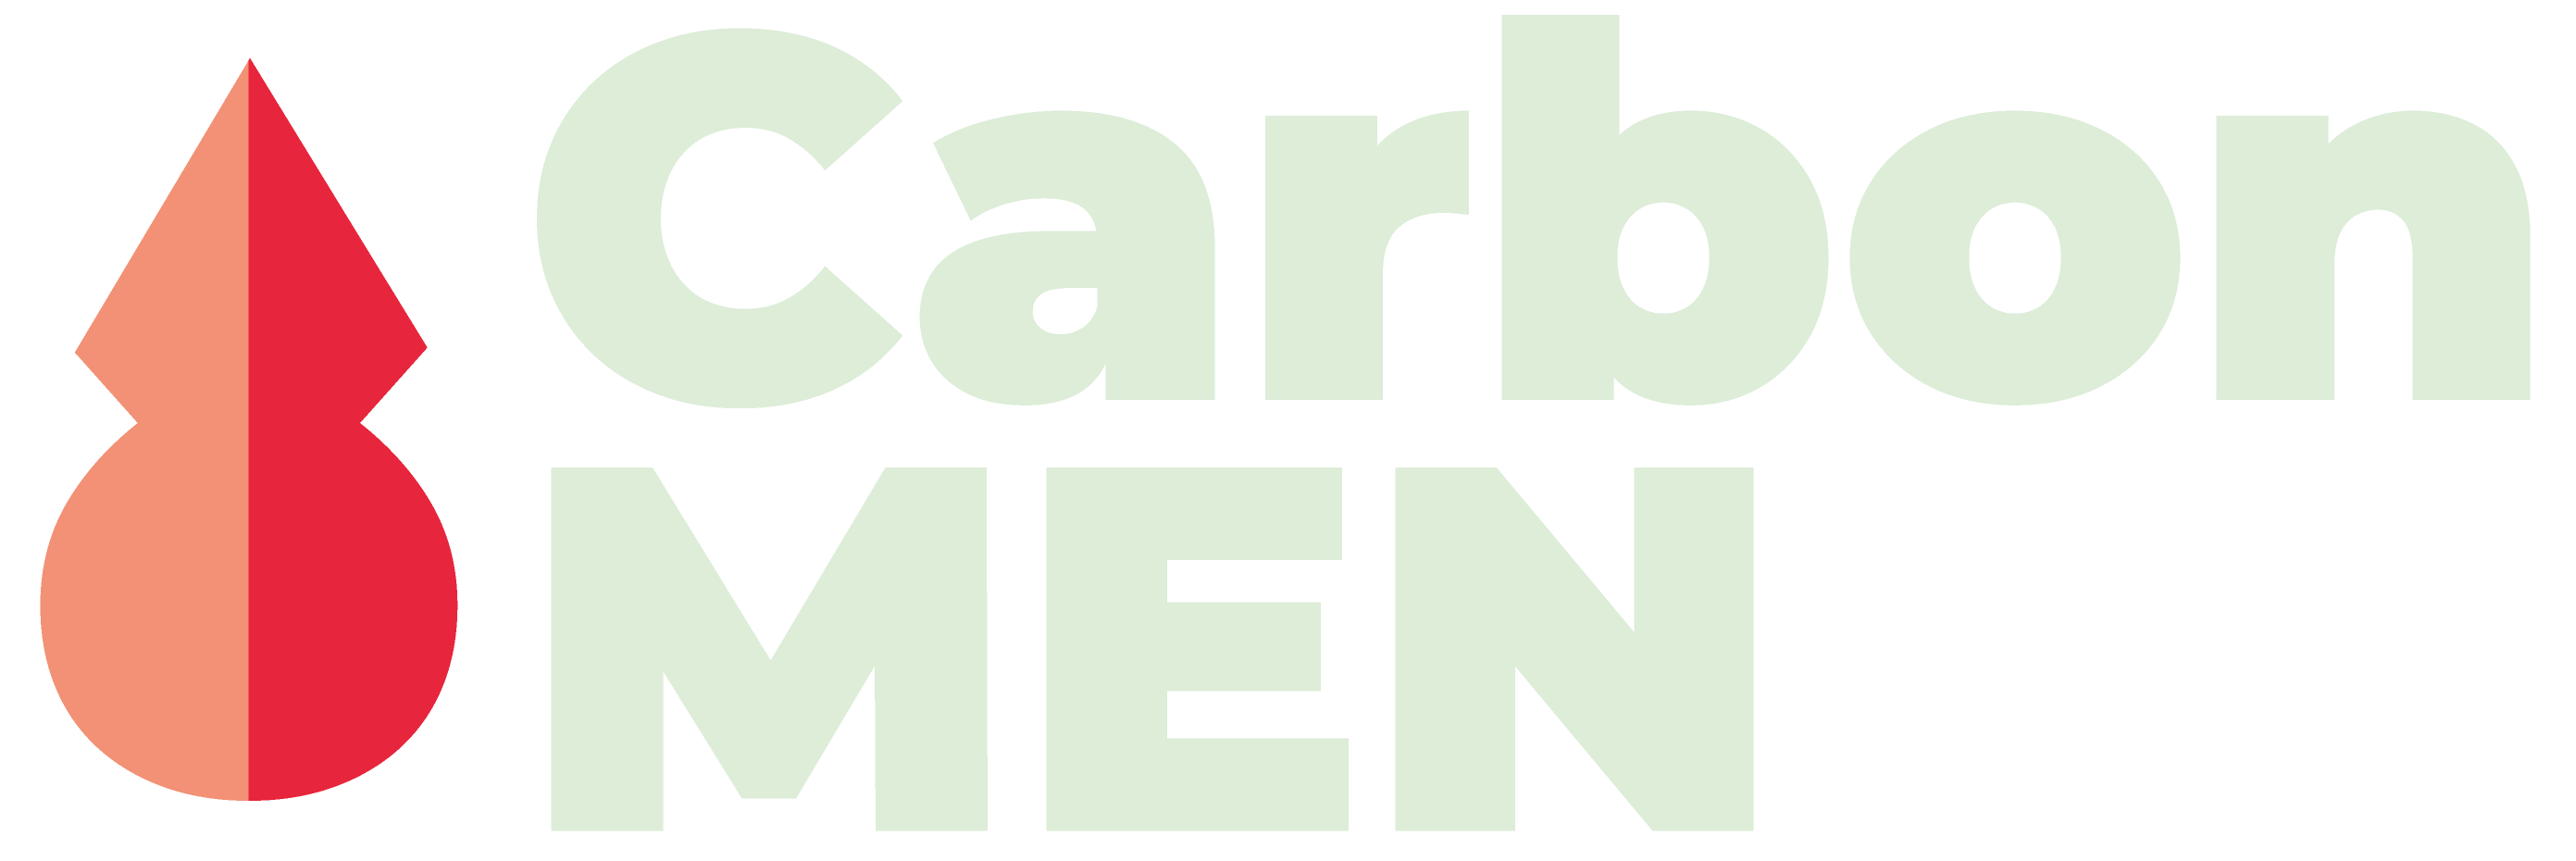 CarbonMen | The #1st Male Education, Positive Masculinity, Community for Men